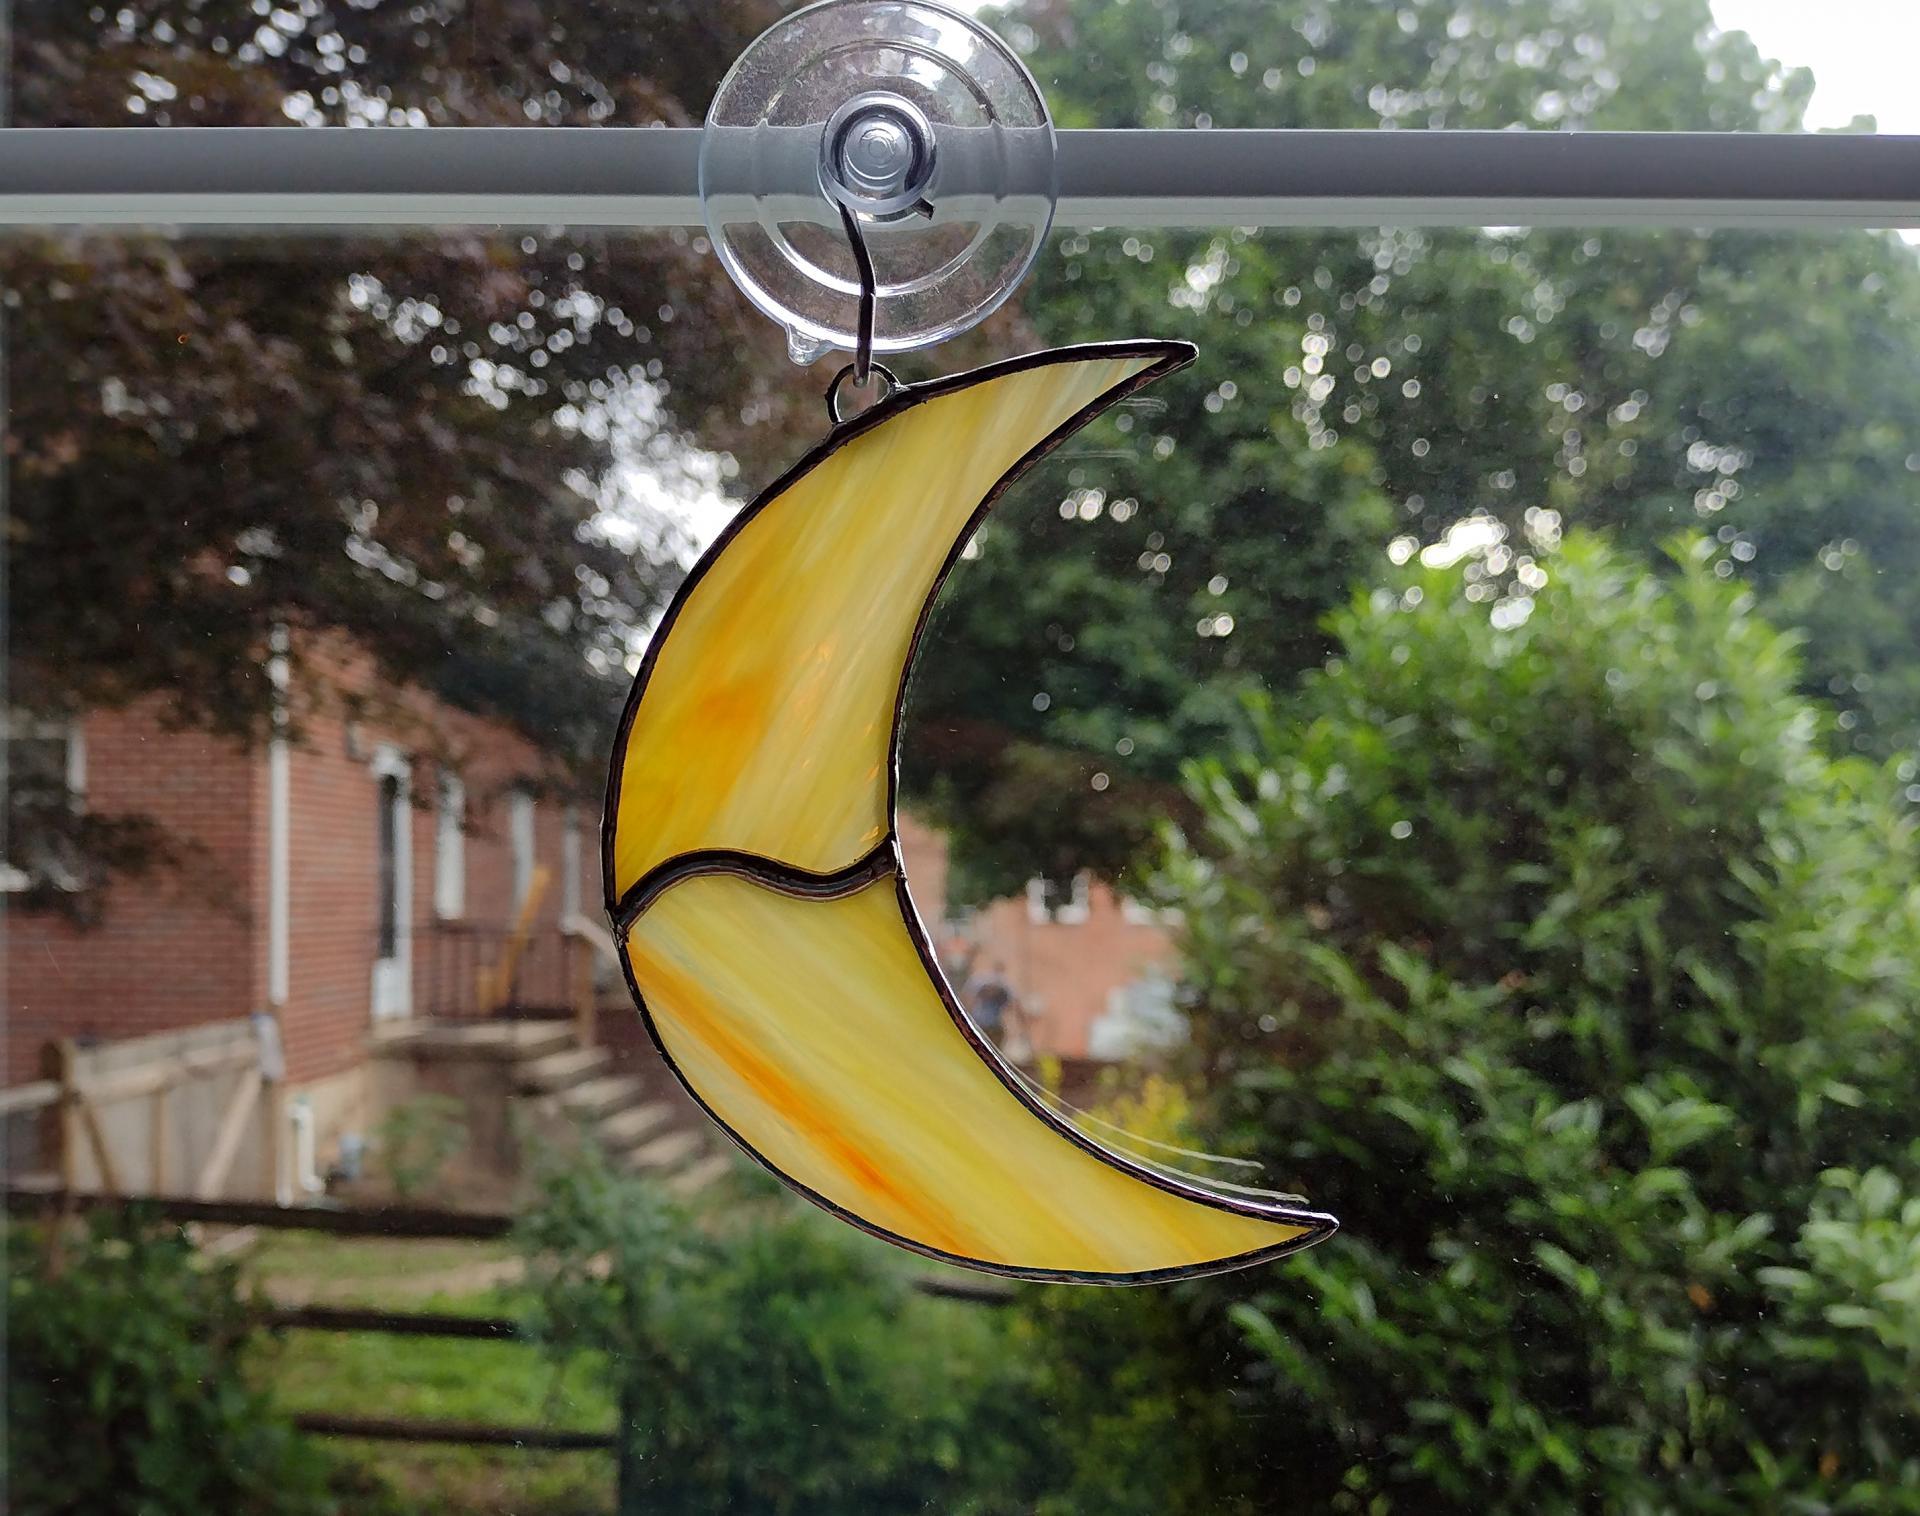 Stained glass crescent moon suncatcher, measures 4 1/2 in tall by 3 in wide.Made with orange and yellow swirled Corsica glass